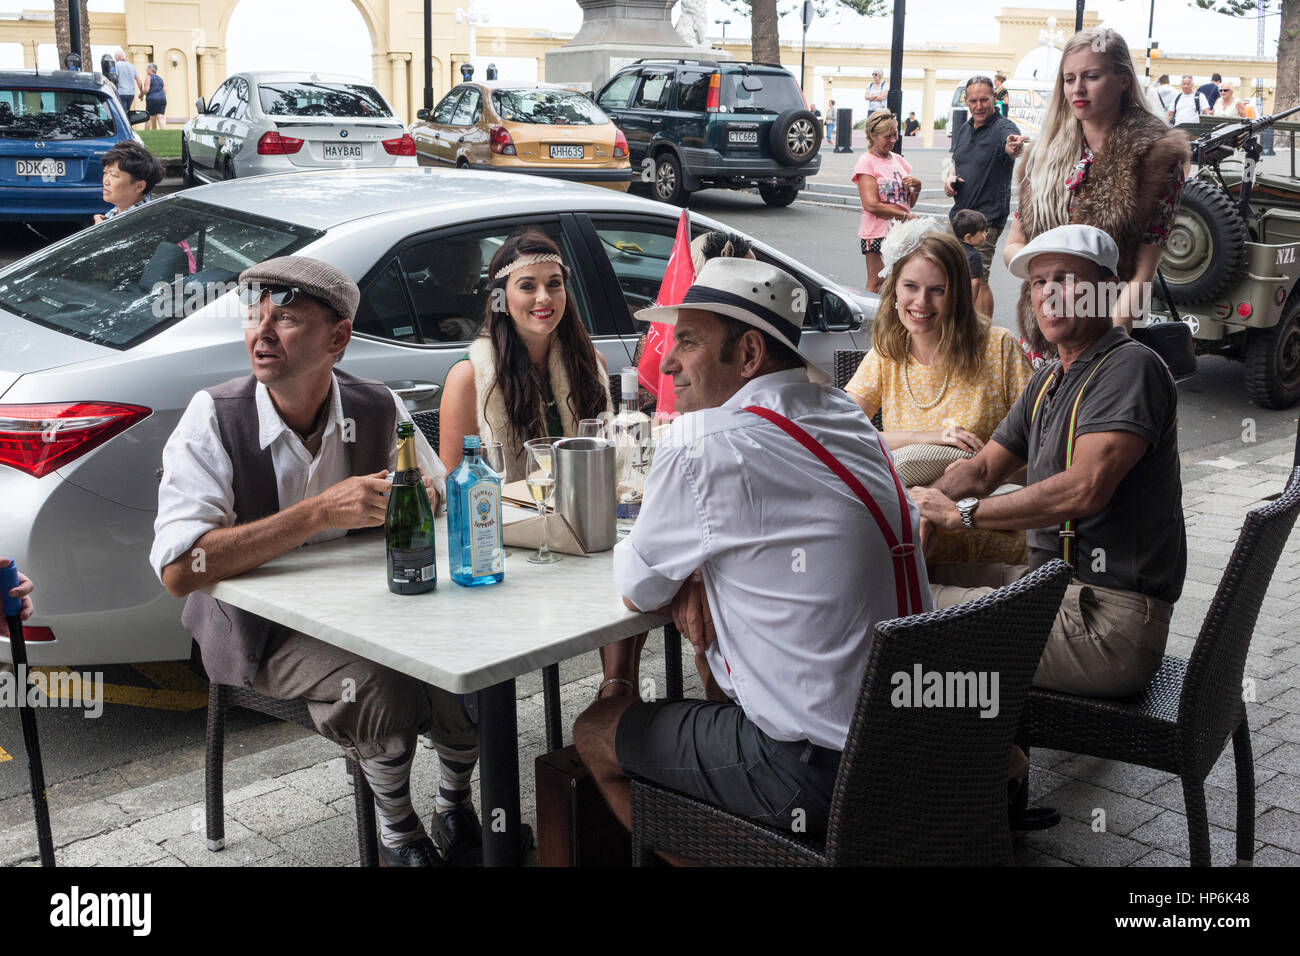 Nice people with fancy clothes sitting on a table outdoors celebrating in the Art Deco Festival 2017 in Napier, New Zealand Stock Photo